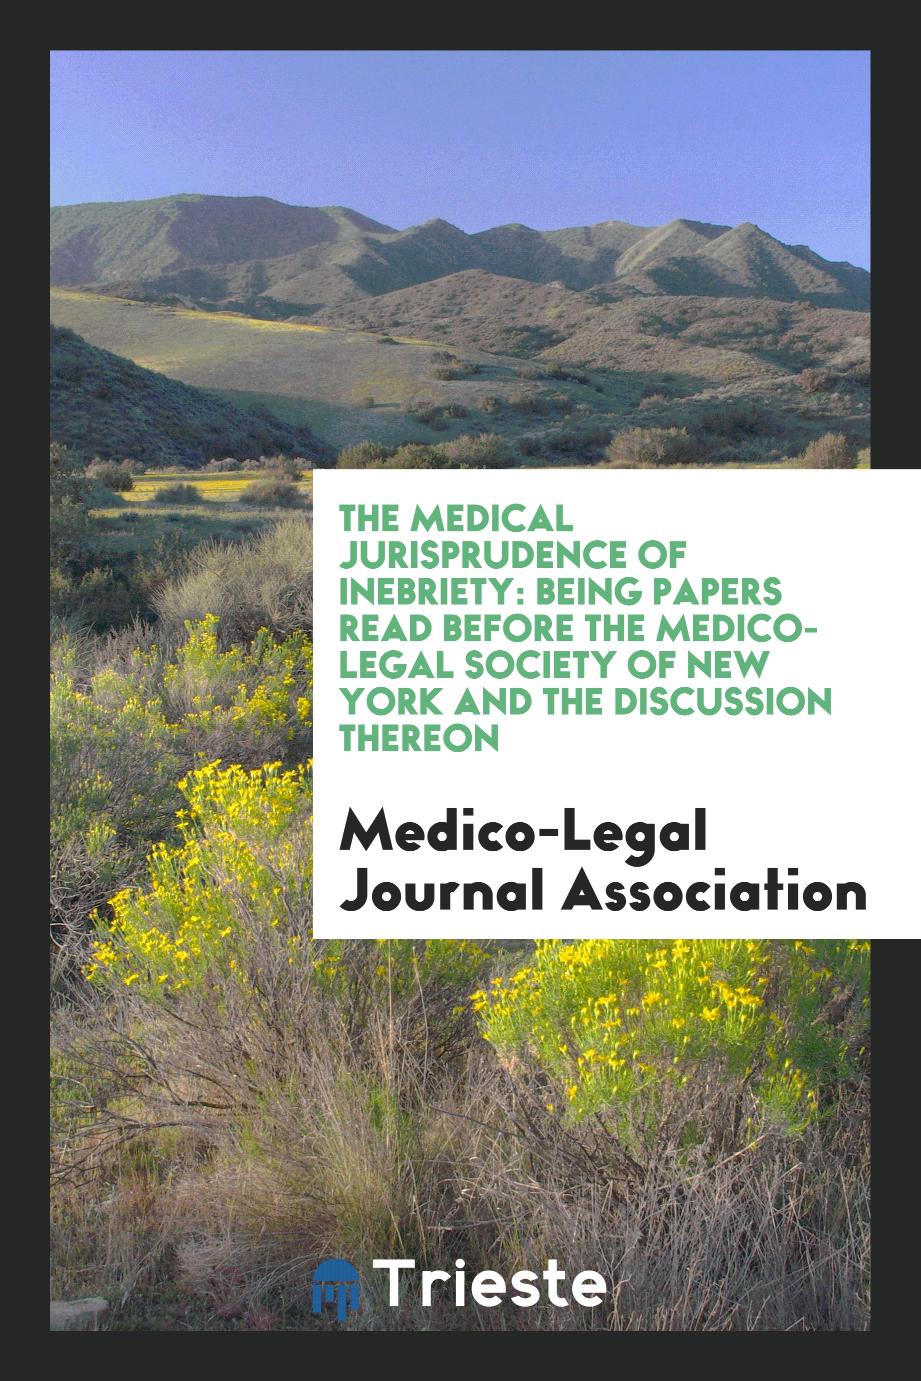 The Medical Jurisprudence of Inebriety: Being Papers Read before the Medico-Legal Society of New York and the Discussion Thereon